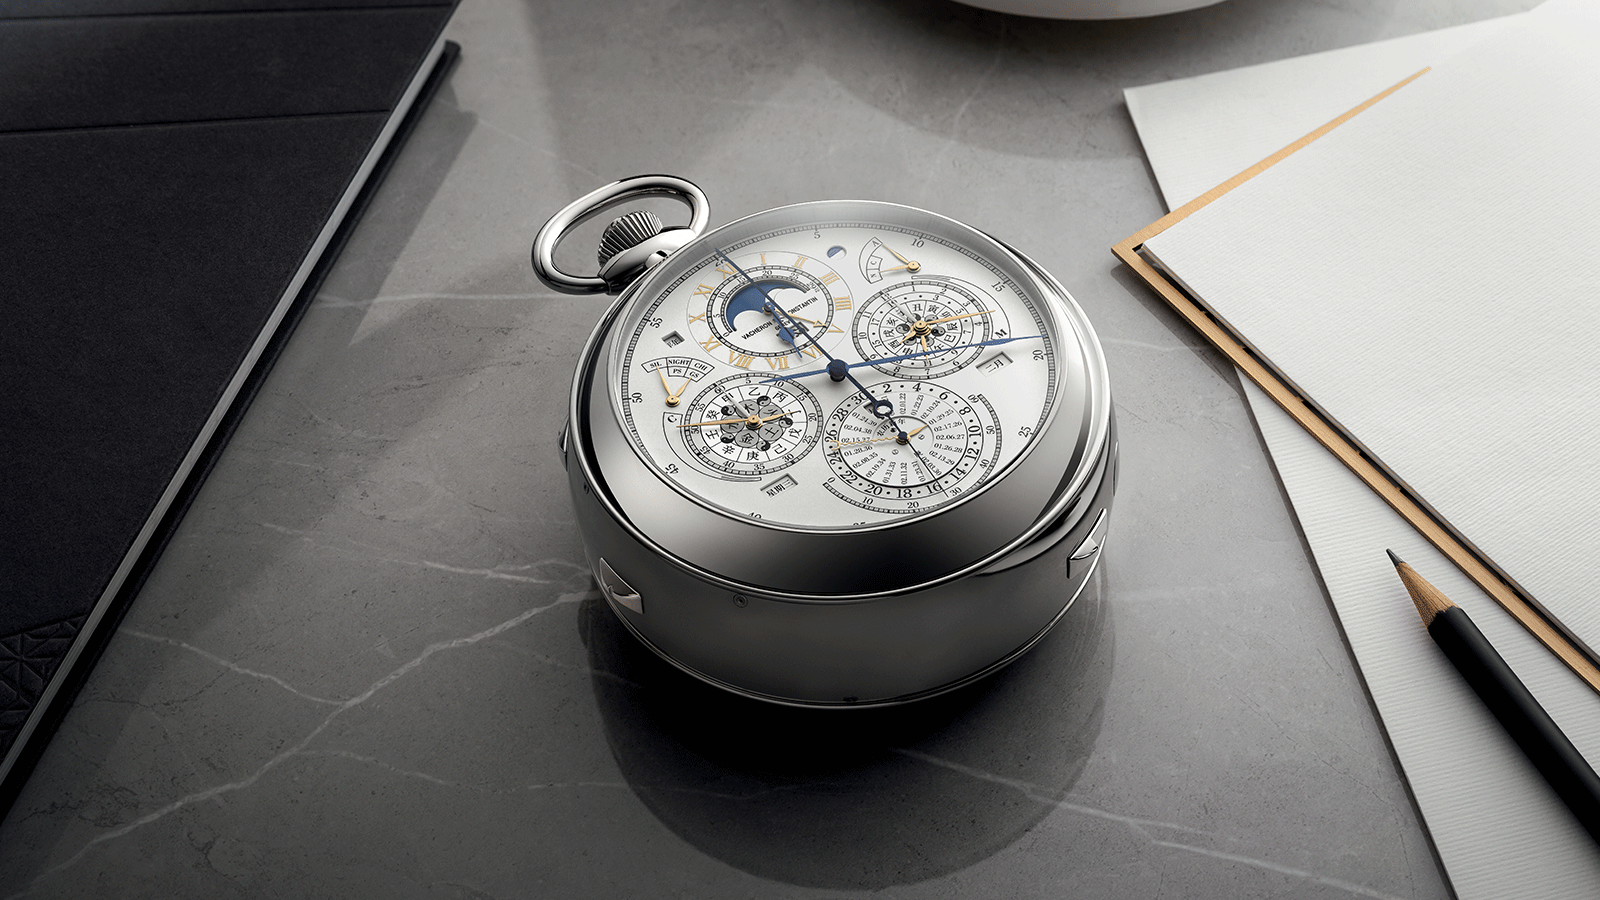 Vacheron Constantin presents the world's most complicated watch. Comprising 63 horological complications and 2,877 components, it surpasses the record already held by the Maison with Reference 57260.